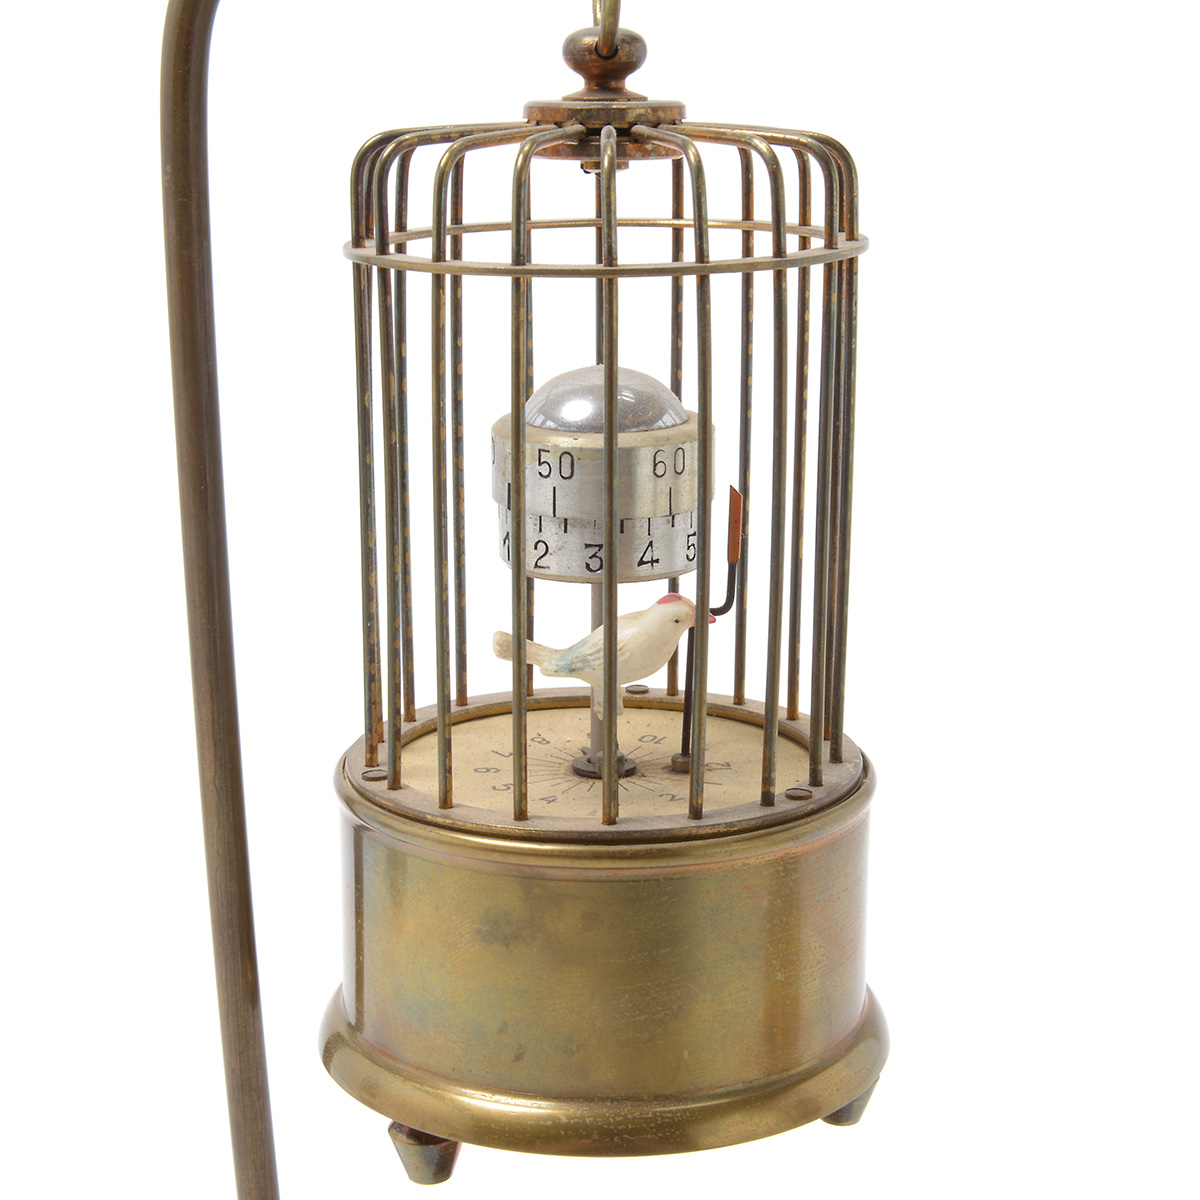 Three Hanging Birdcage Music Boxes with Clock Mechanism - Image 8 of 13